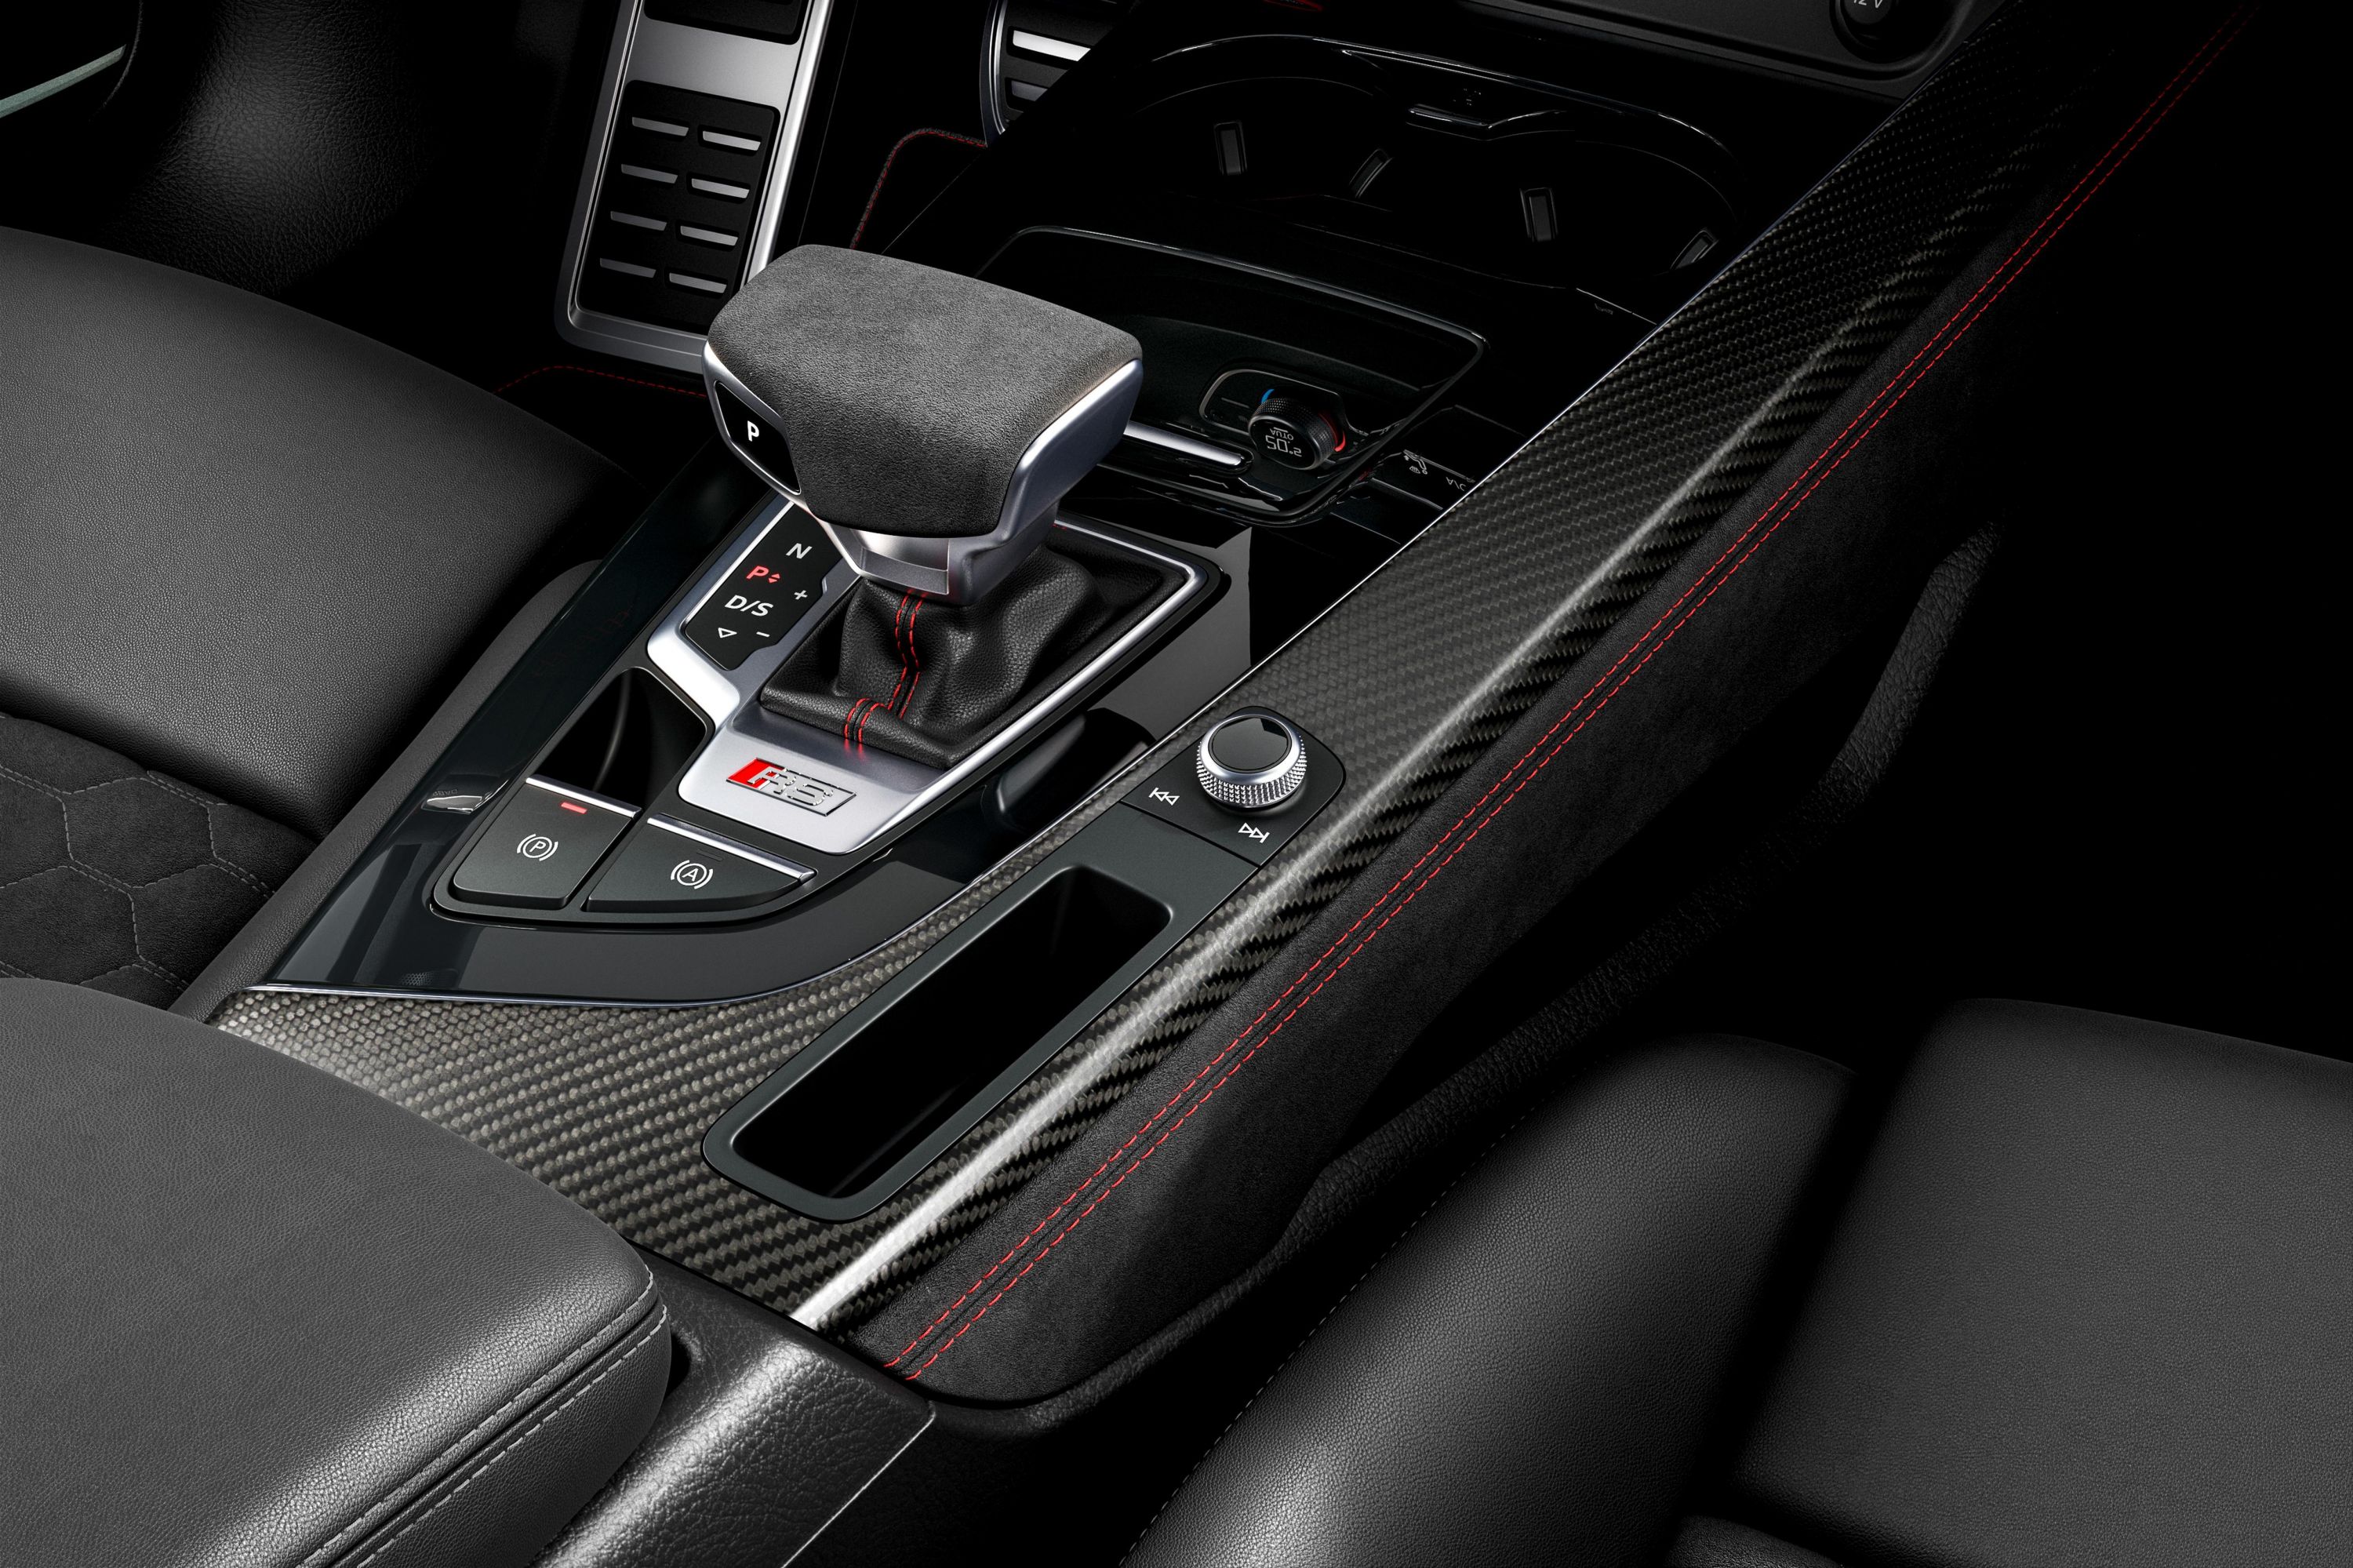 Audi RS4 Interior Images & Photos - See the Inside of the Latest Audi RS4 |  CarsGuide